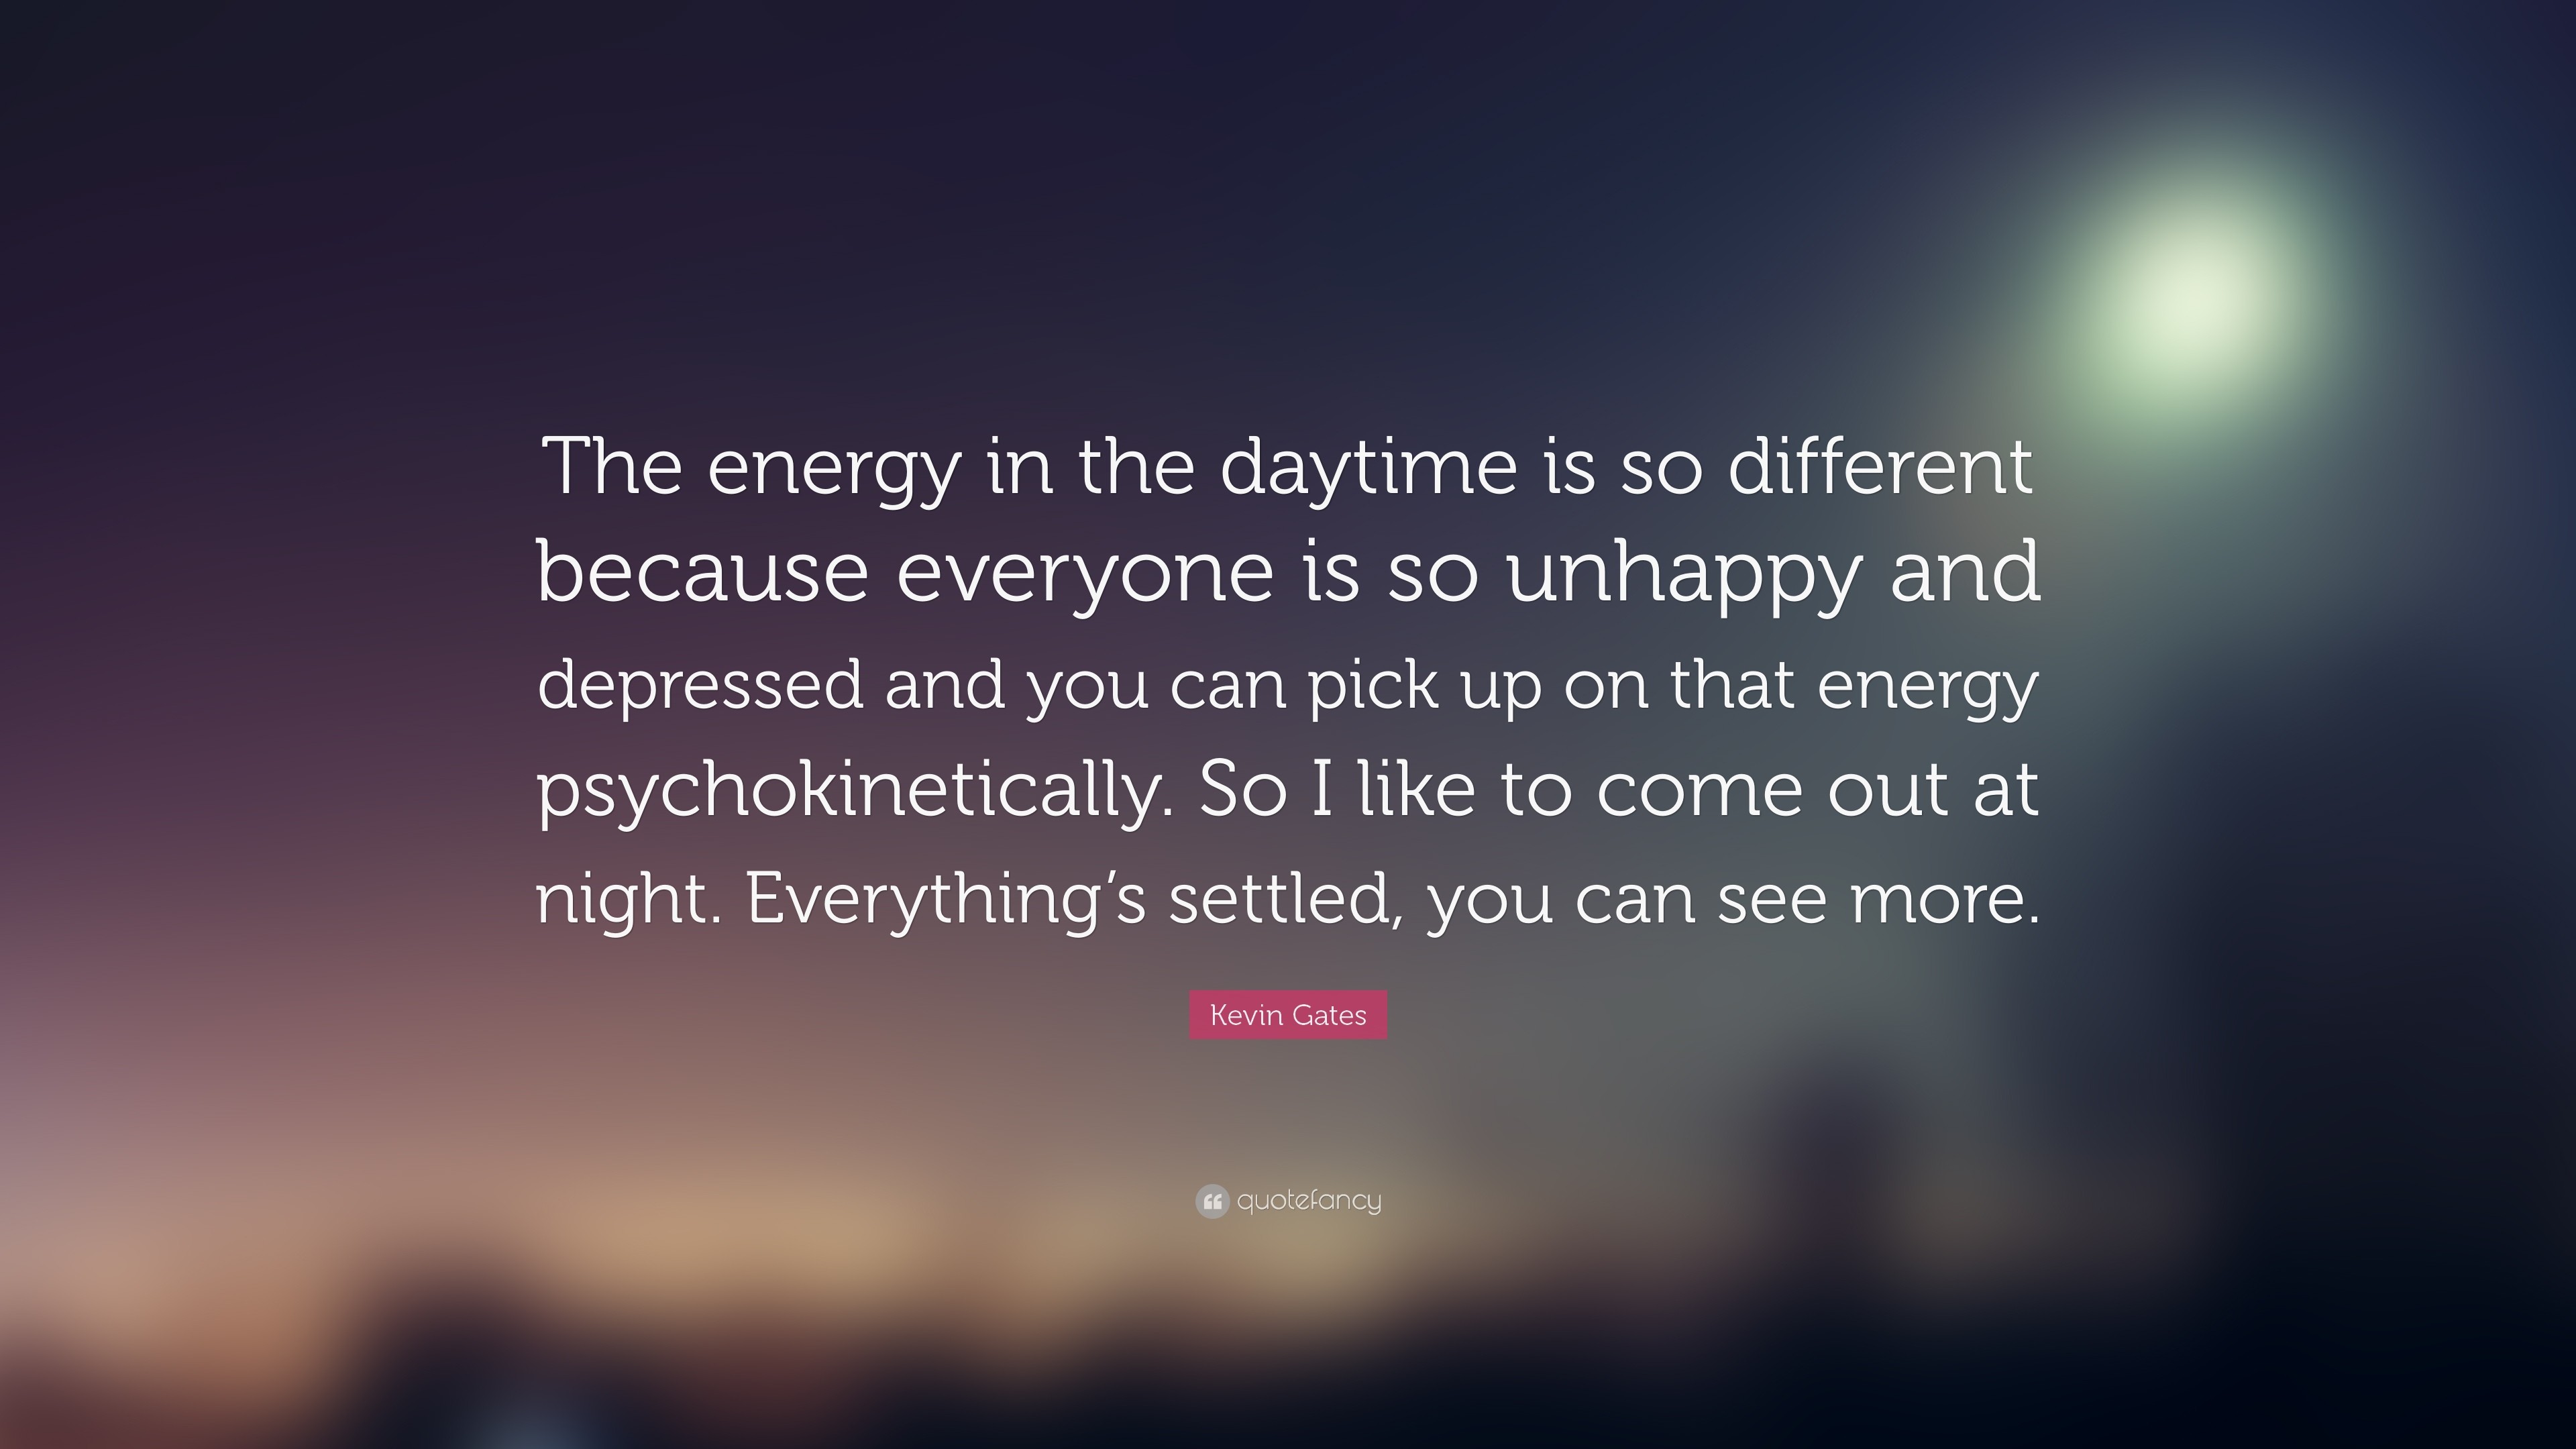 3840x2160 Kevin Gates Quote: “The energy in the daytime is so different because  everyone is